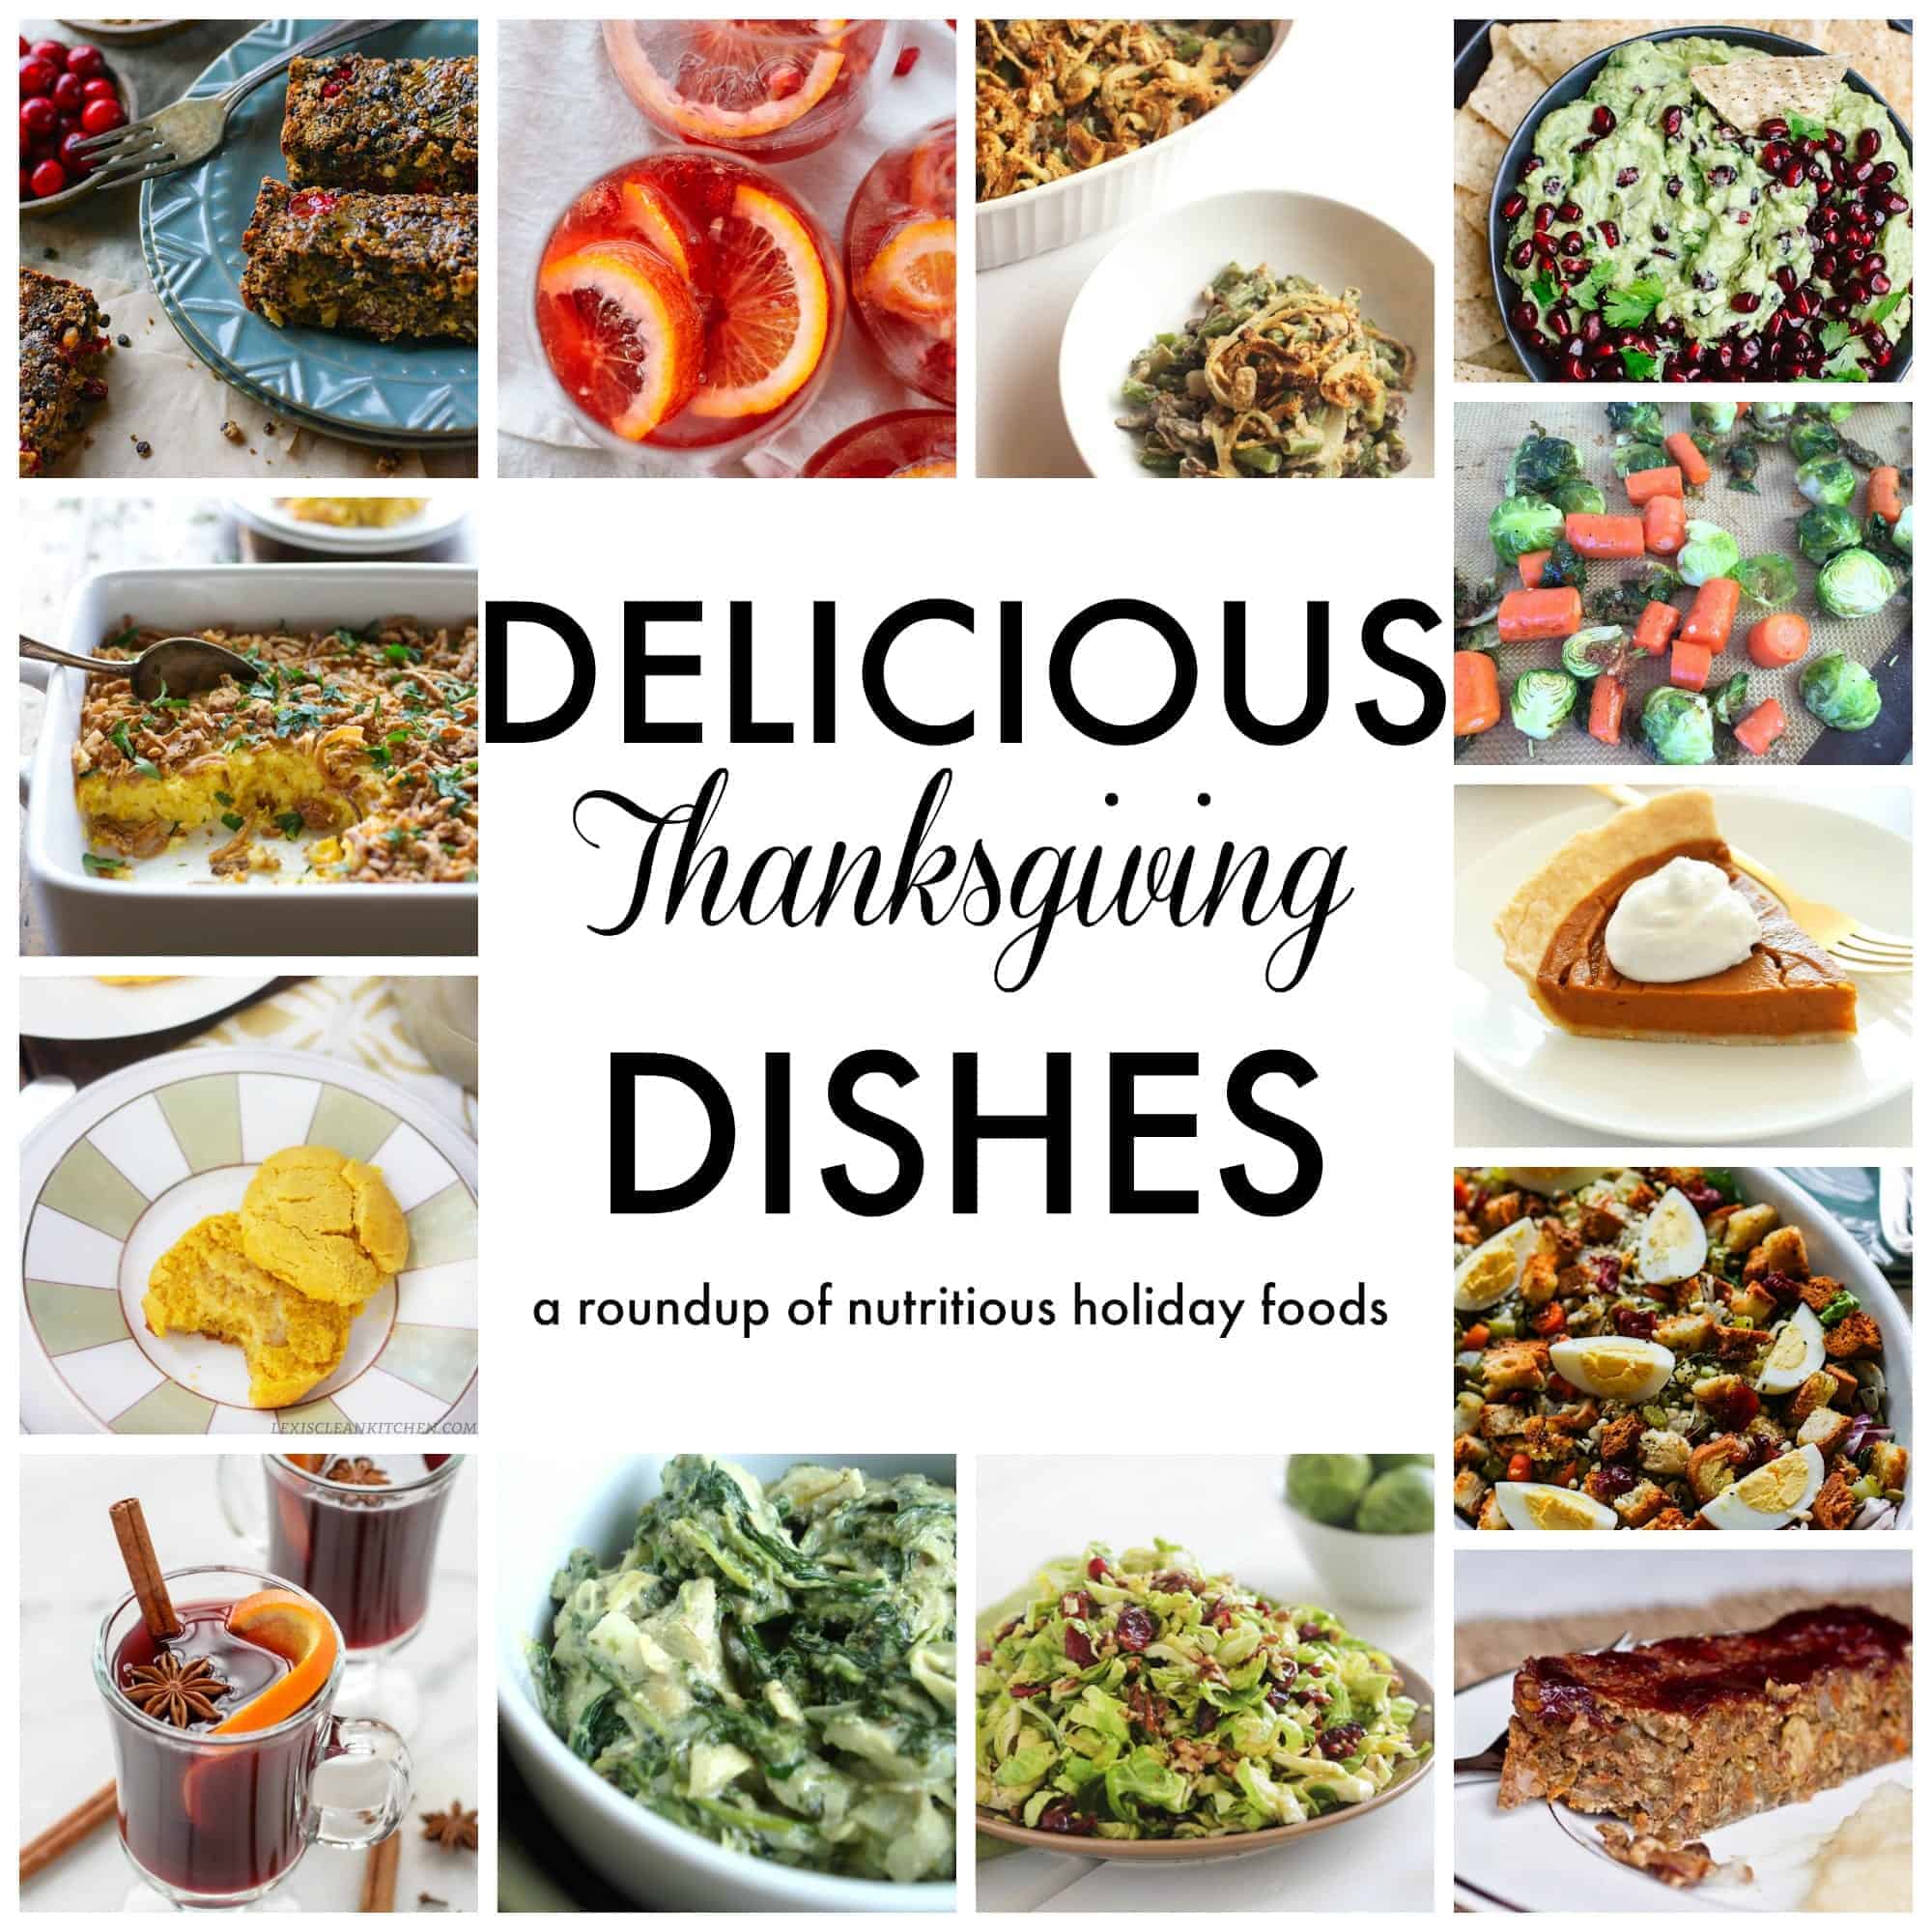 NUTRITIOUS Thanksgiving Dishes from Treble in the Kitchen